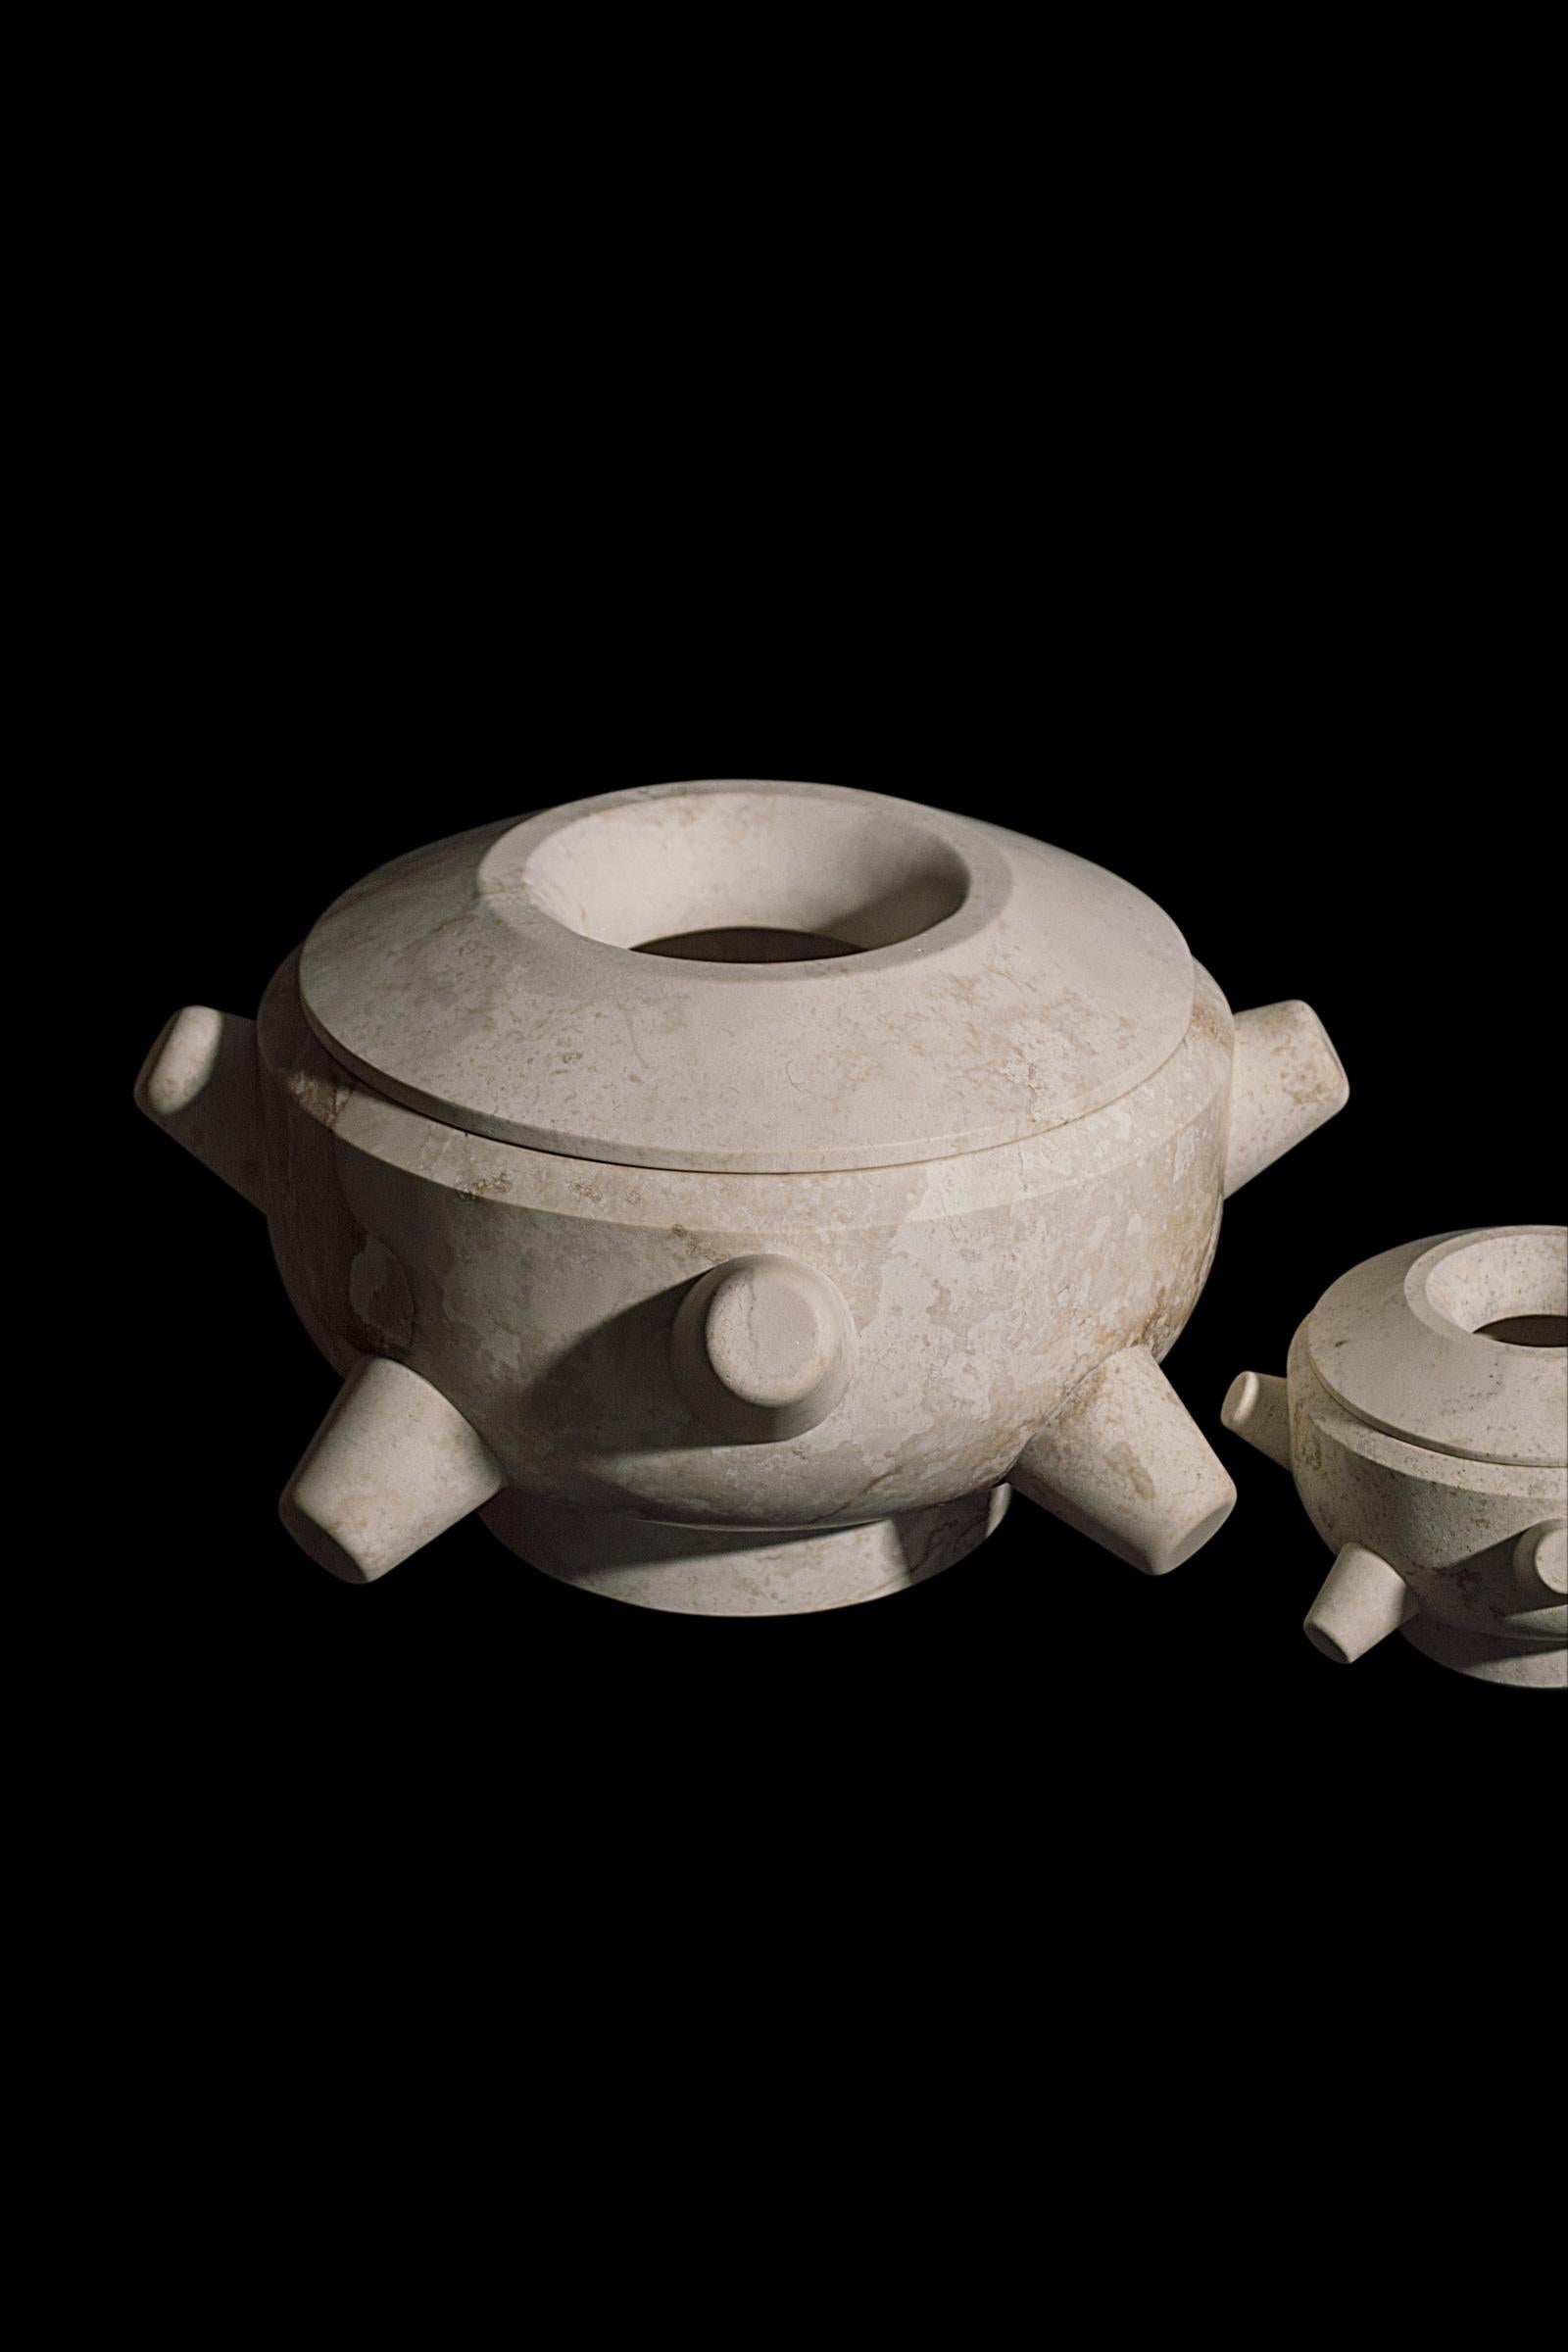 Part of ACOOCOORO’s Ceremonia special series, Copaleras (incense burners) create a play between their soft appearance, their ceremonial function and natural material: Yucatán Peninsula's Crema Maya stone. They suggest the presence of magical events,